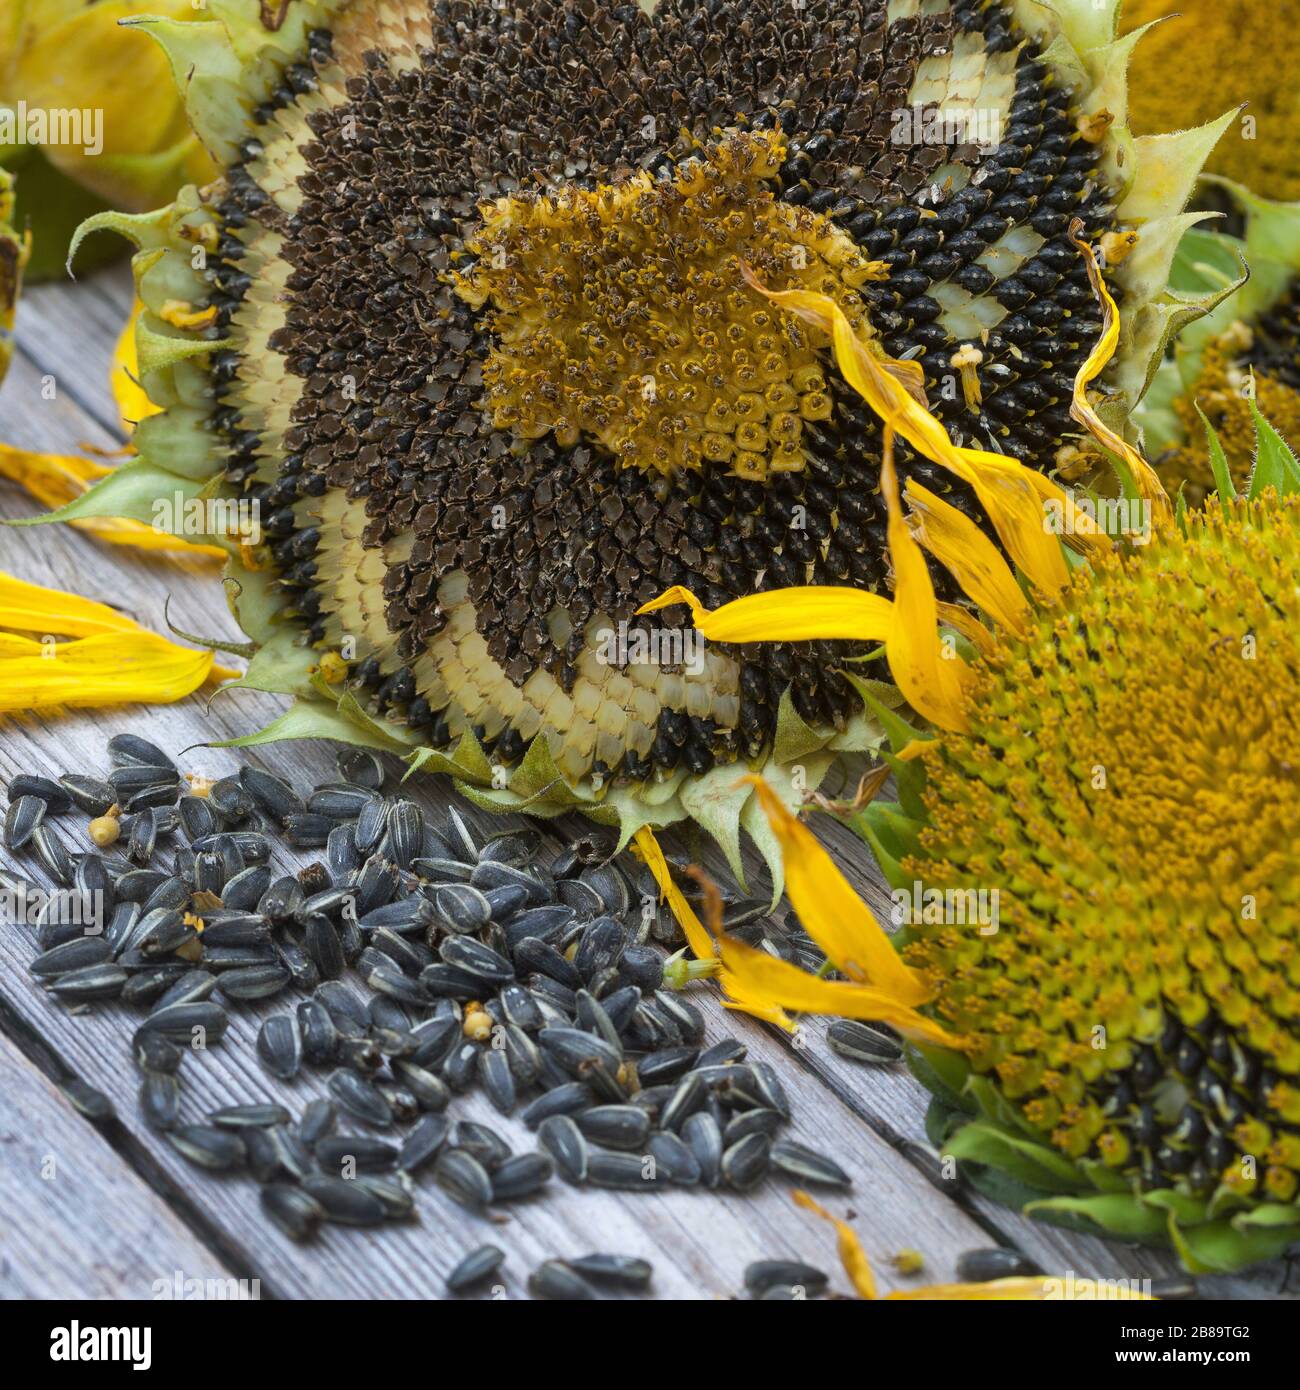 common sunflower (Helianthus annuus), flowerheads lying together with sunflower seeds on a wooden table, Germany Stock Photo